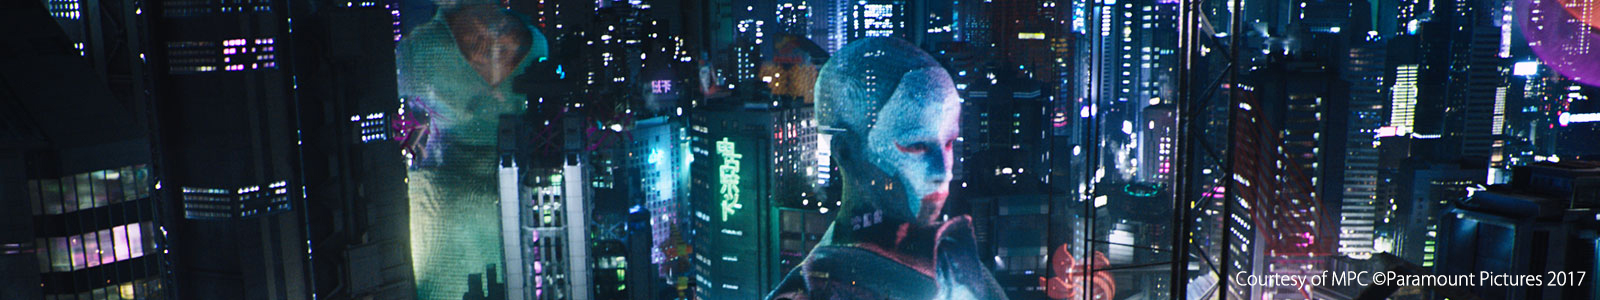 On a futuristic scene, the head of a humanoid robot is seen on a backdrop of a city's skyscrapers at night